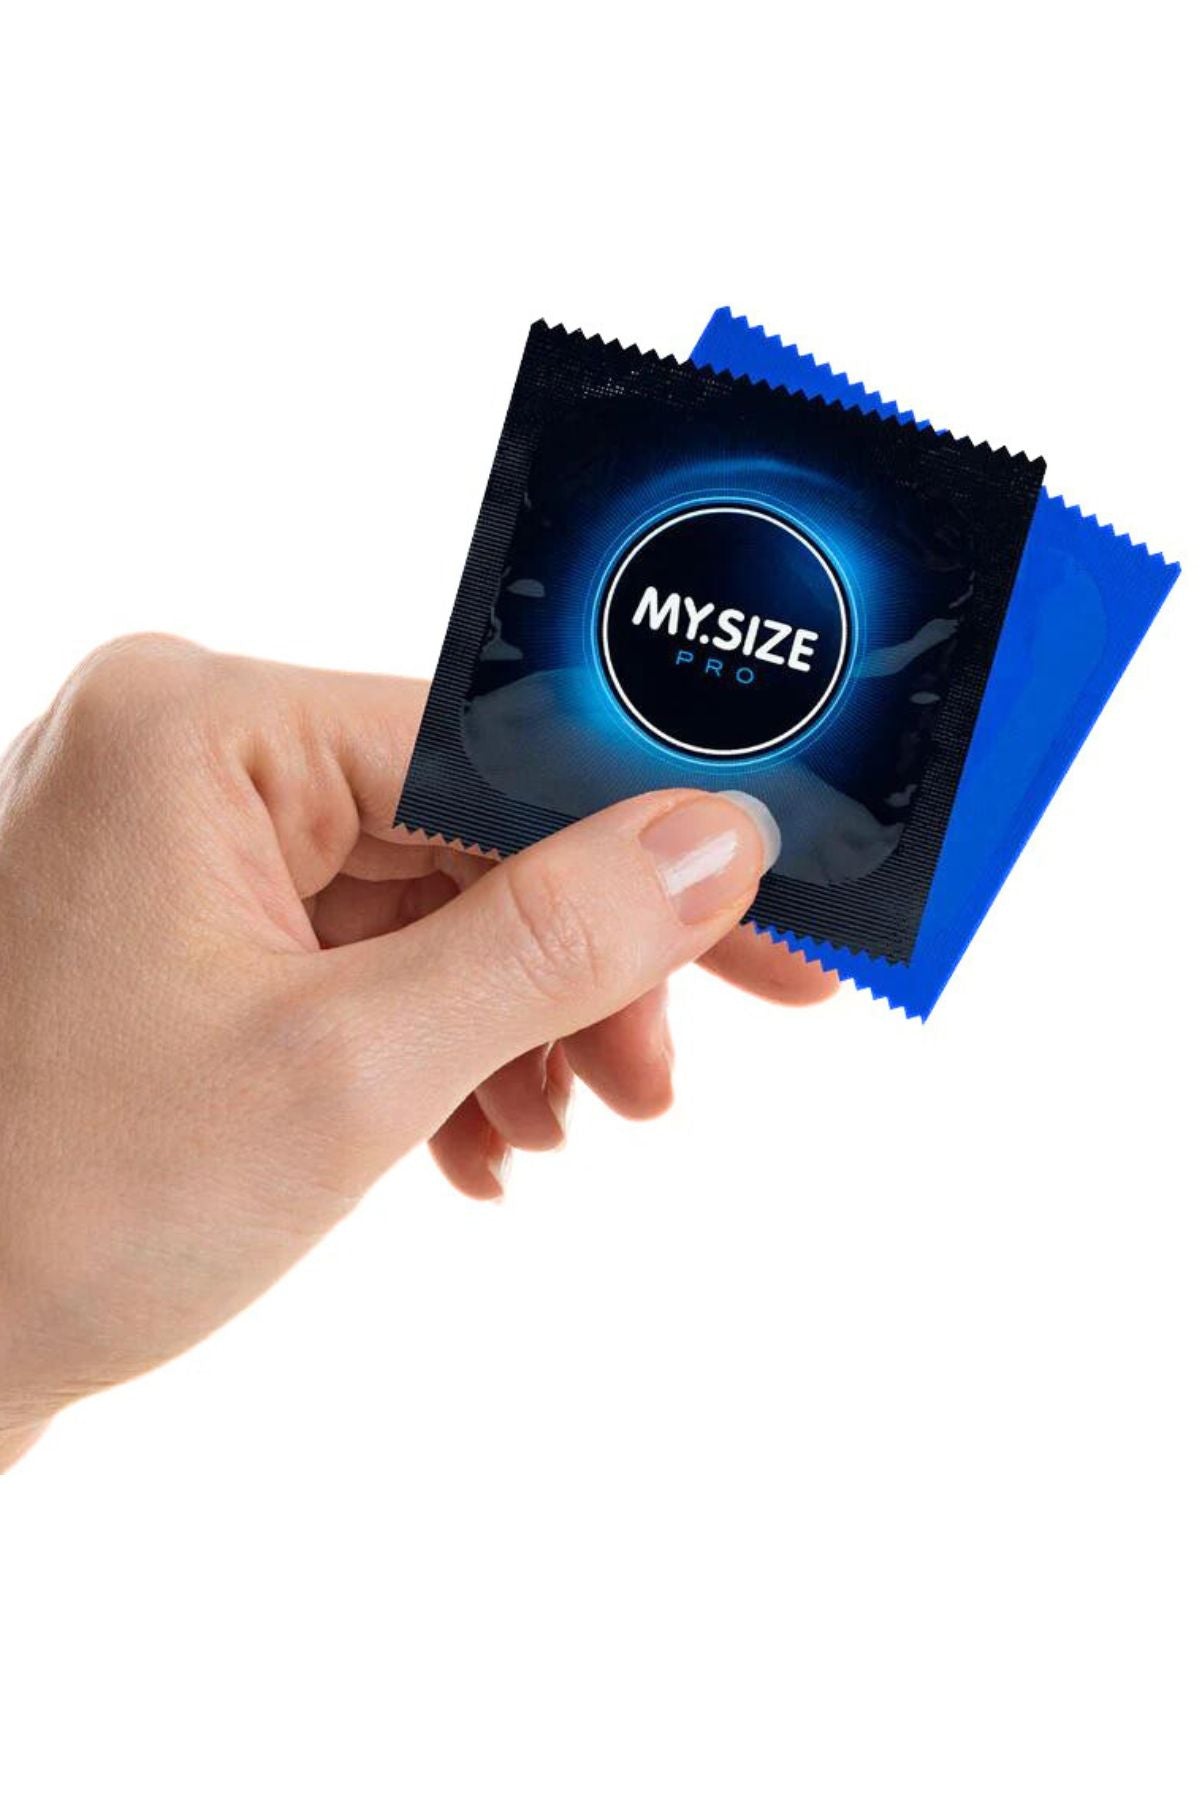 MY.SIZE Pro 72mm Condoms | 10 Pack